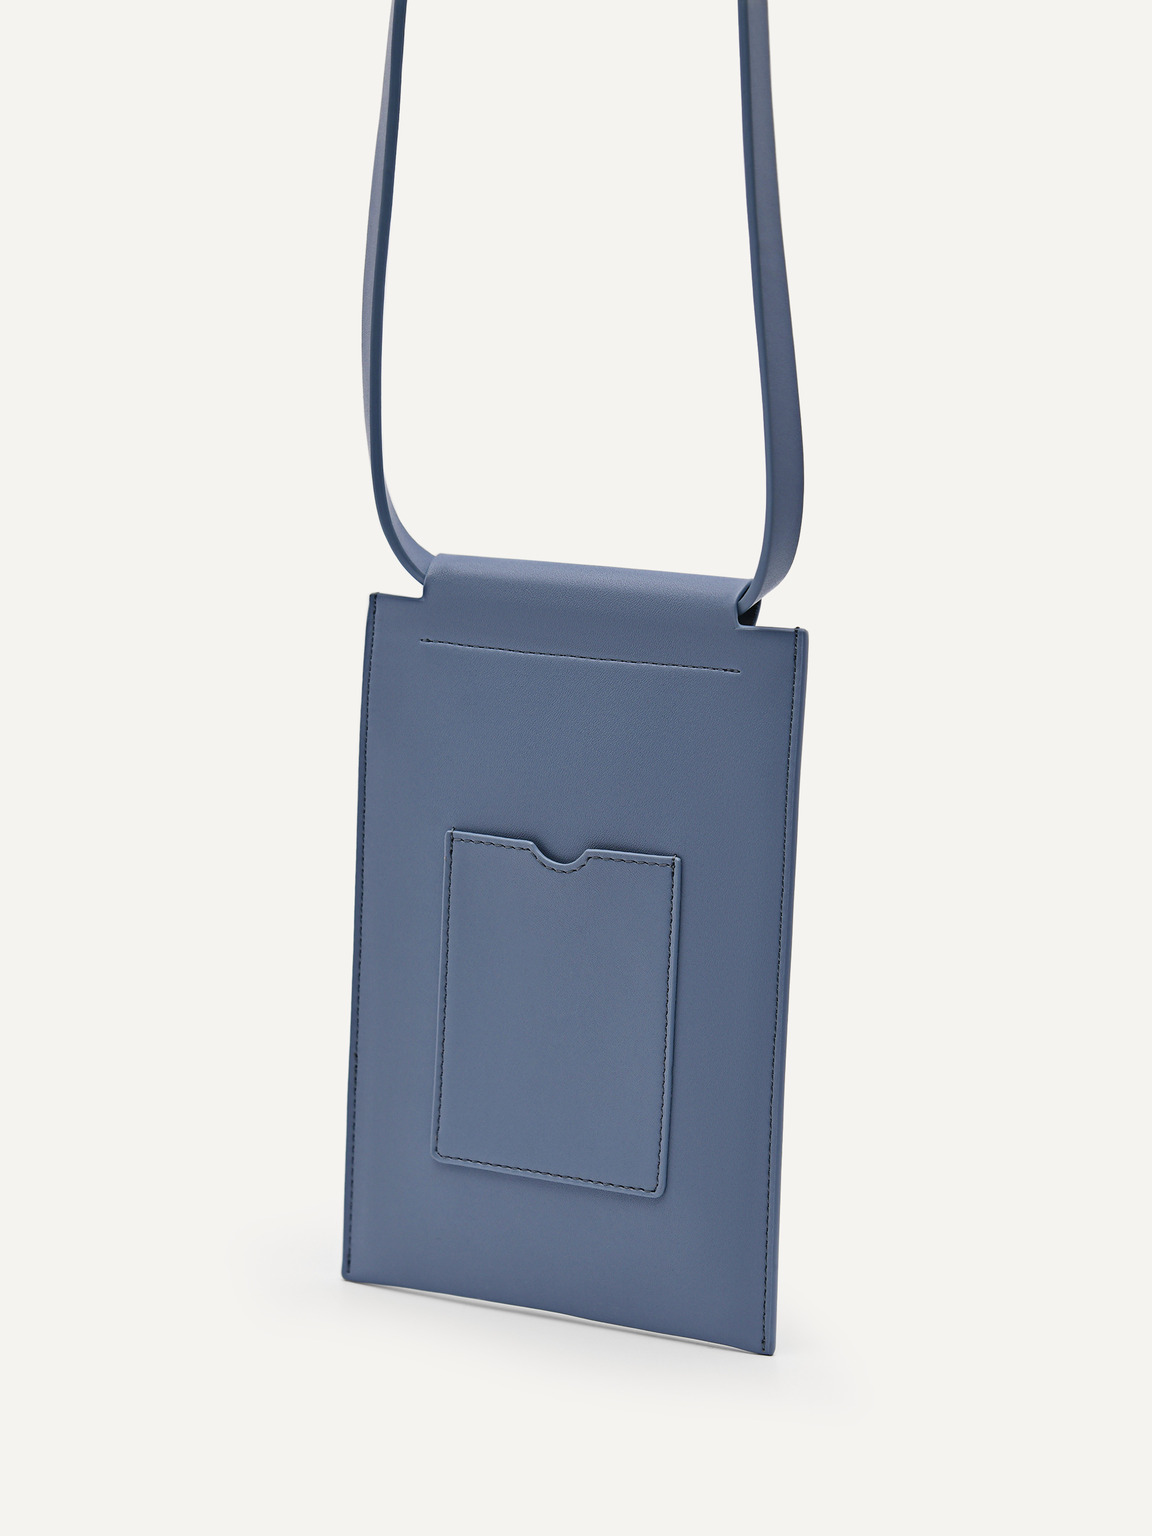 Trip Phone Pouch with Lanyard, Slate Blue